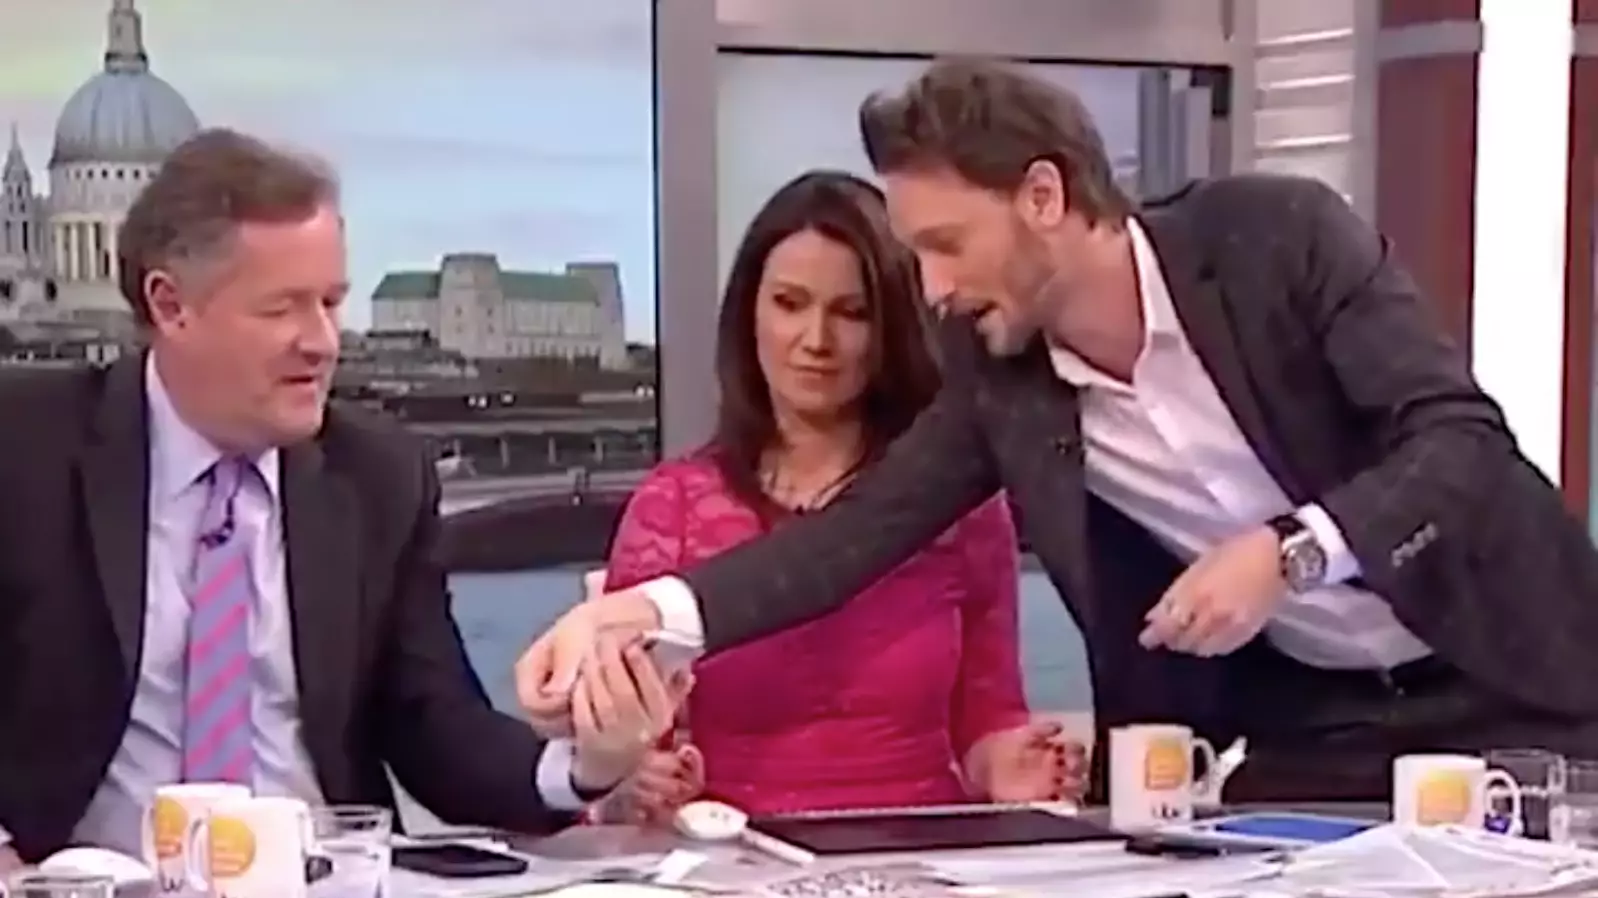 'Mentalist' Stuns Piers Morgan By Guessing His Pin Number On 'Good Morning Britain'